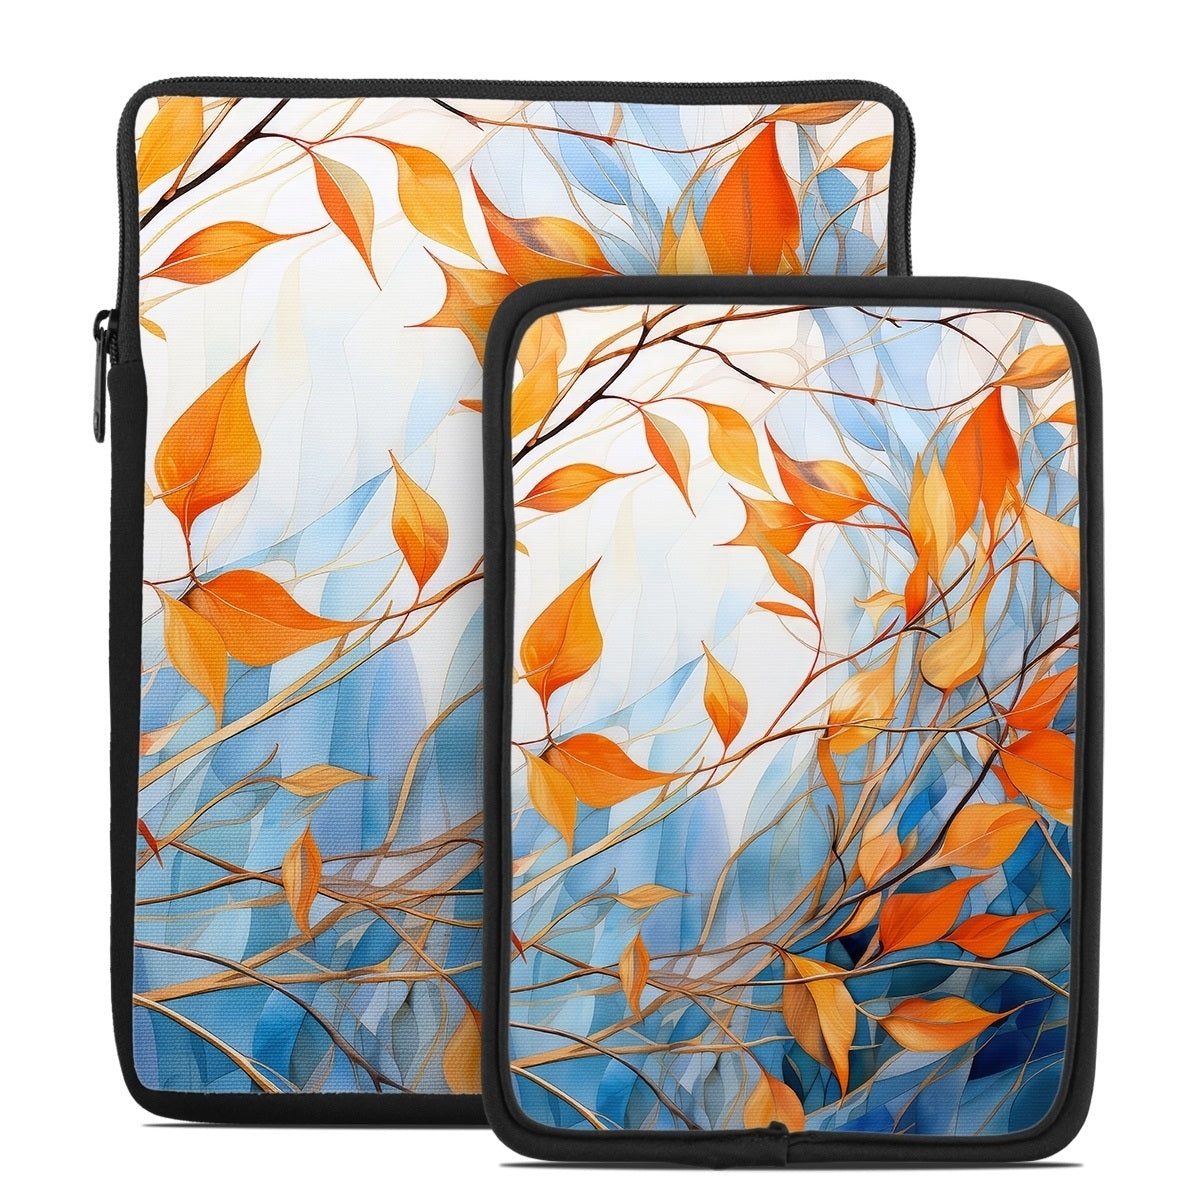 Blustery Day - Tablet Sleeve